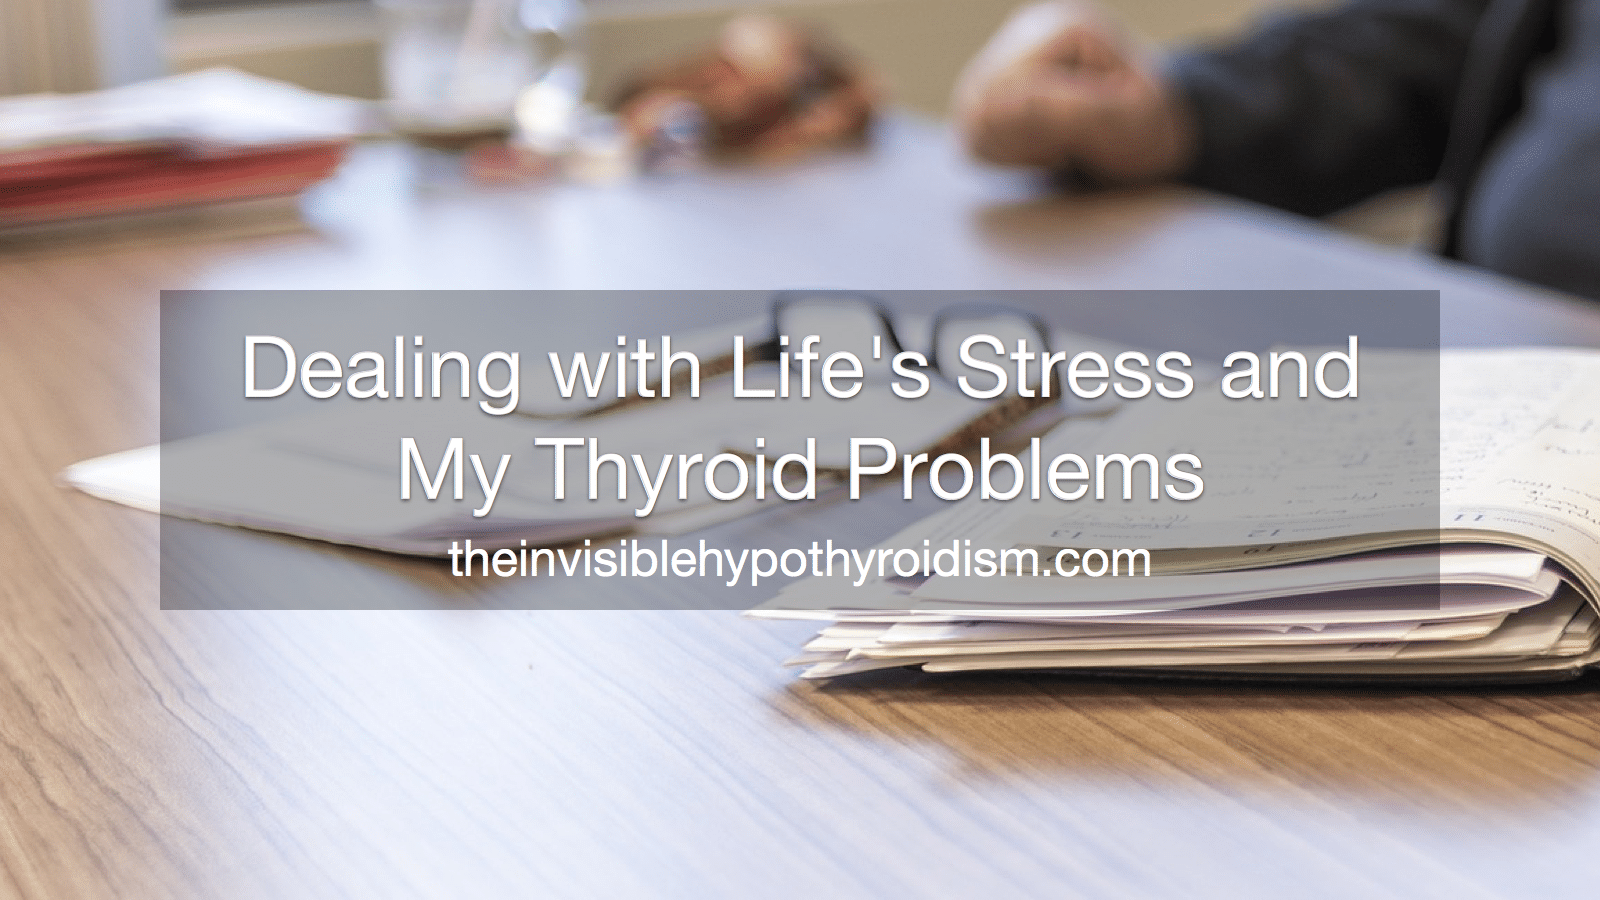 Dealing with Life's Stress and My Thyroid Problems